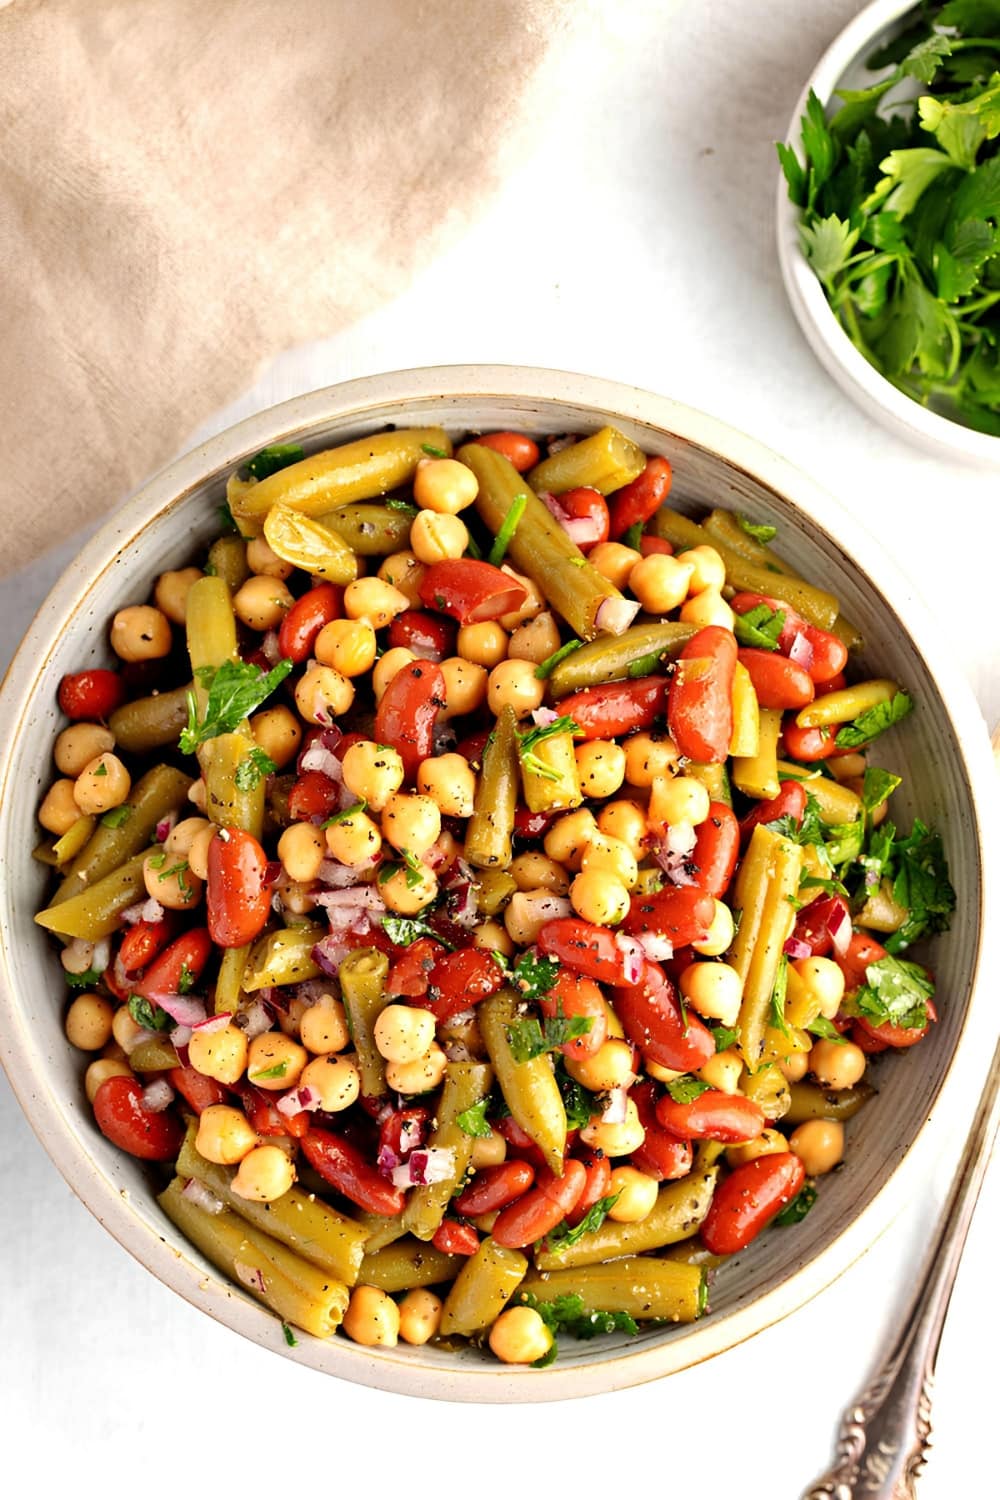 Bowl of Three Bean Salad on a Table